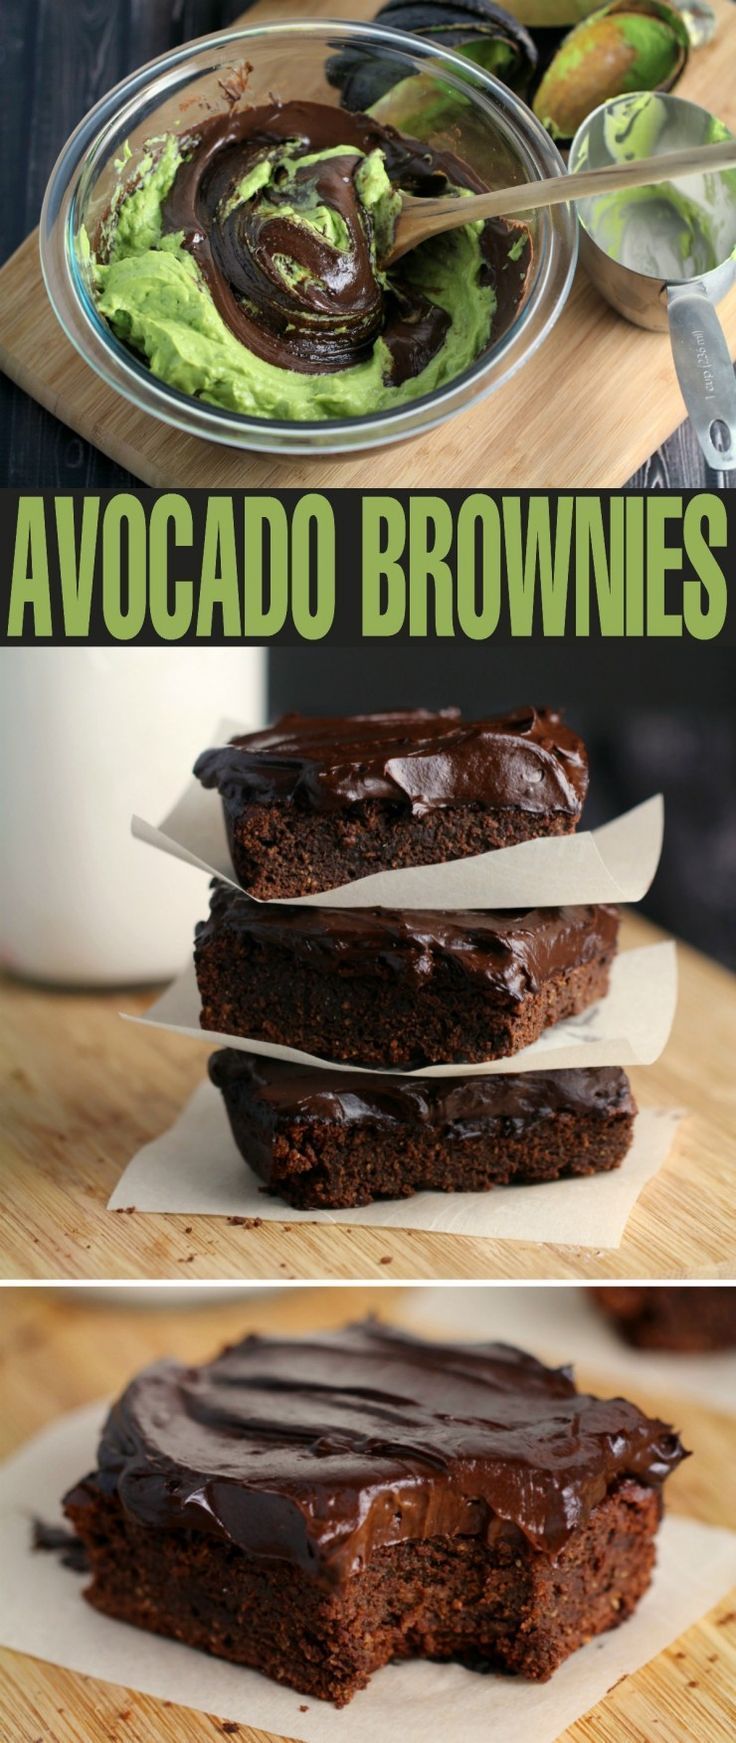 These Fudgy Avocado Brownies with Avocado Frosting are an incredible gluten-free healthier brownie for when you want the dessert